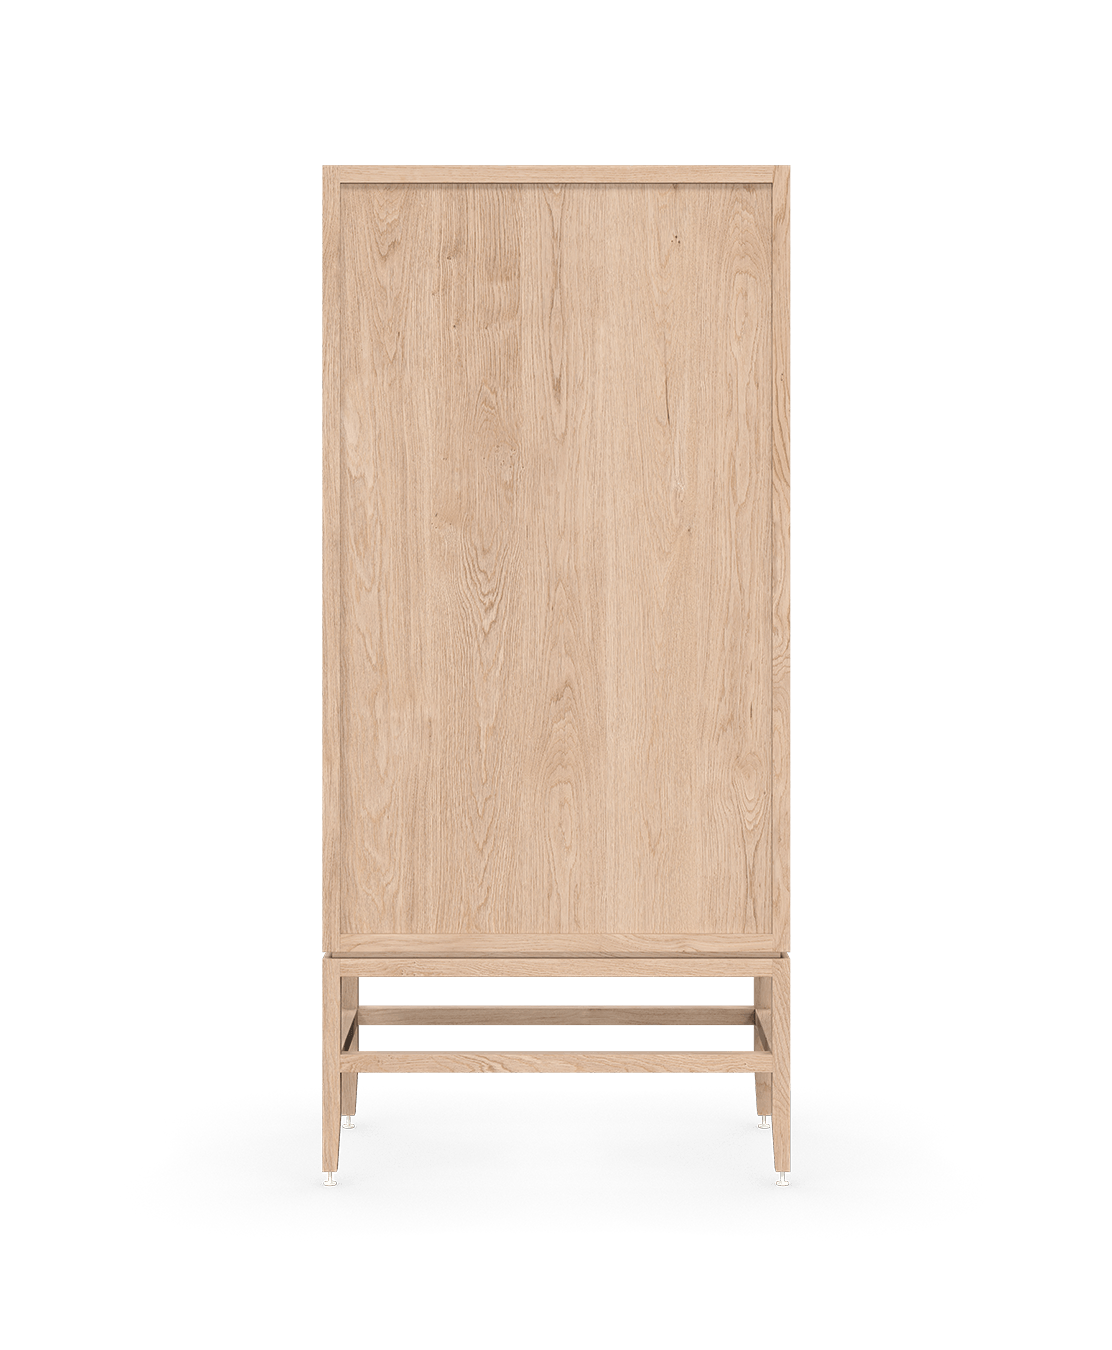 Coquo freestanding modular display hutch in natural oak with glass doors. Perfect for the kitchen, dining, bedroom or living room. 